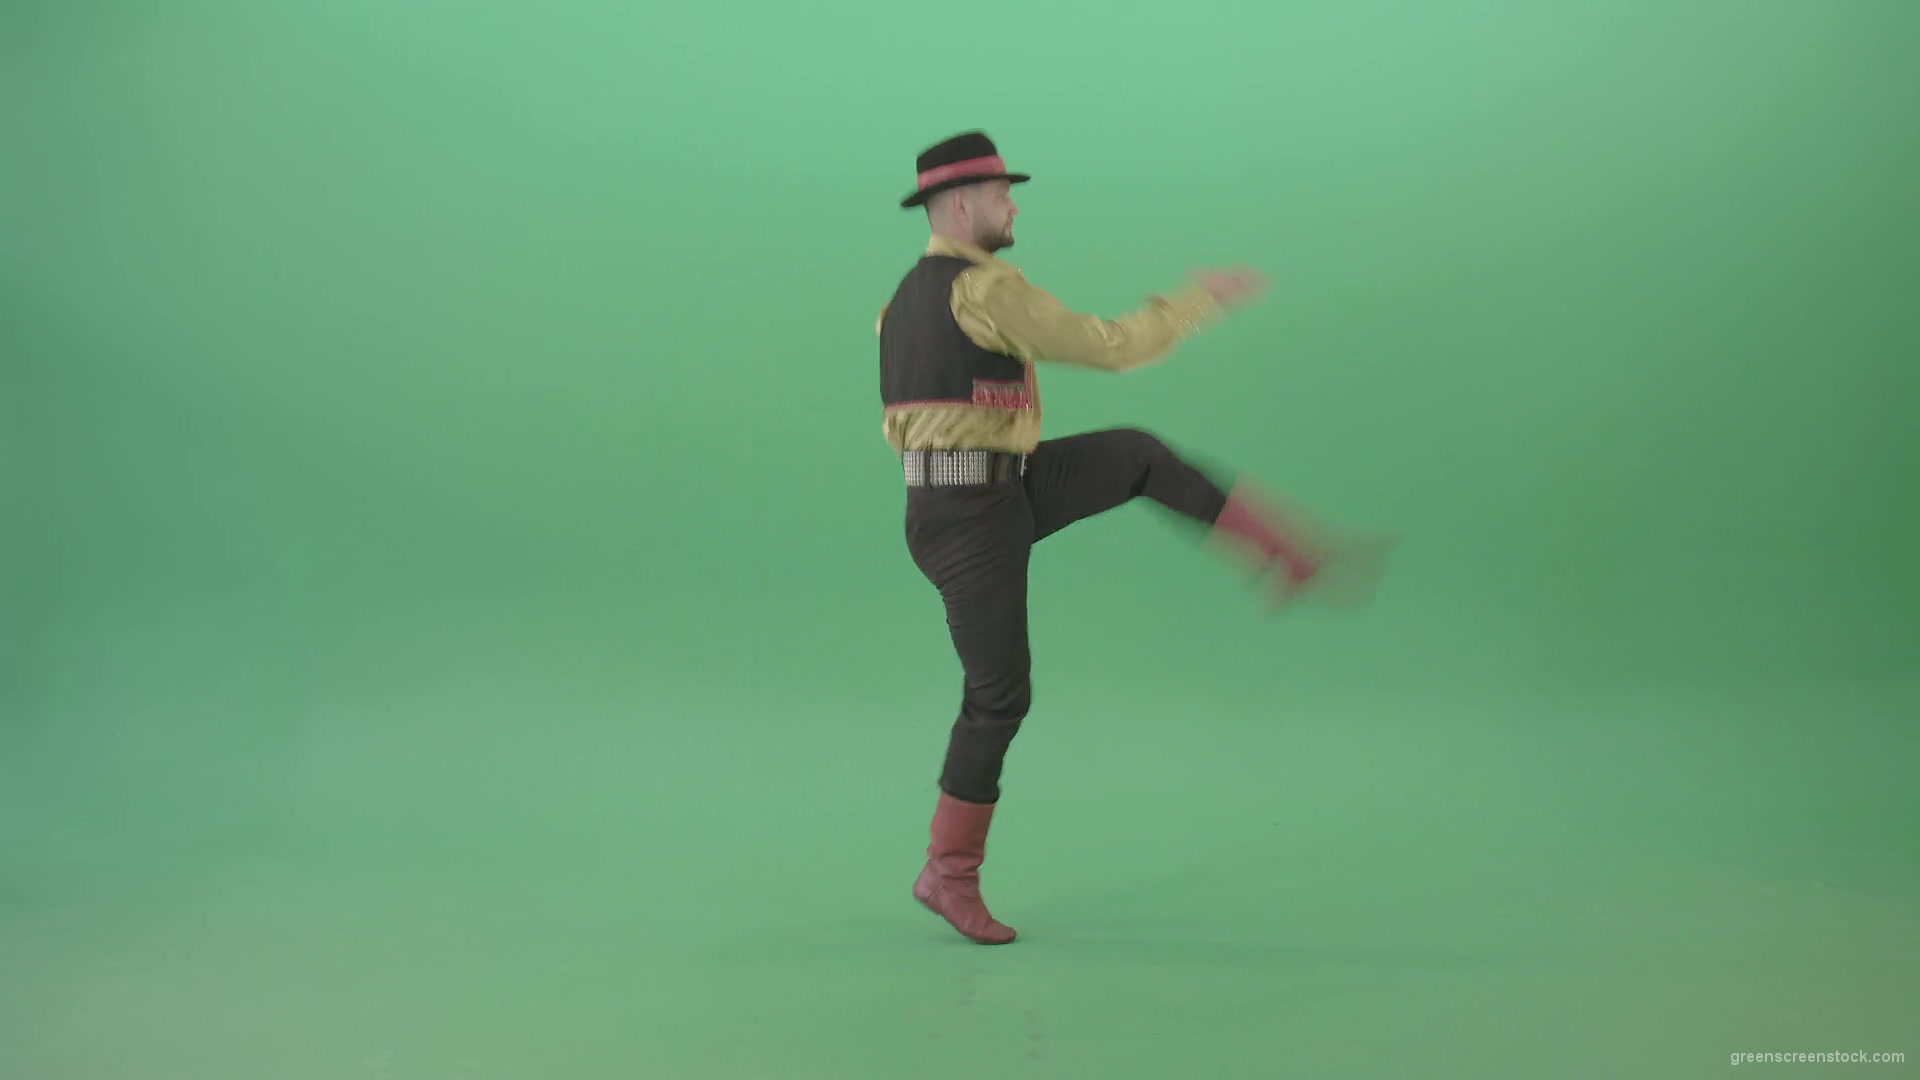 Romanian-Gypsy-Man-dancing-with-clapping-hand-with-side-view-isolated-4K-Green-Screen-Video-Footage-1920_007 Green Screen Stock